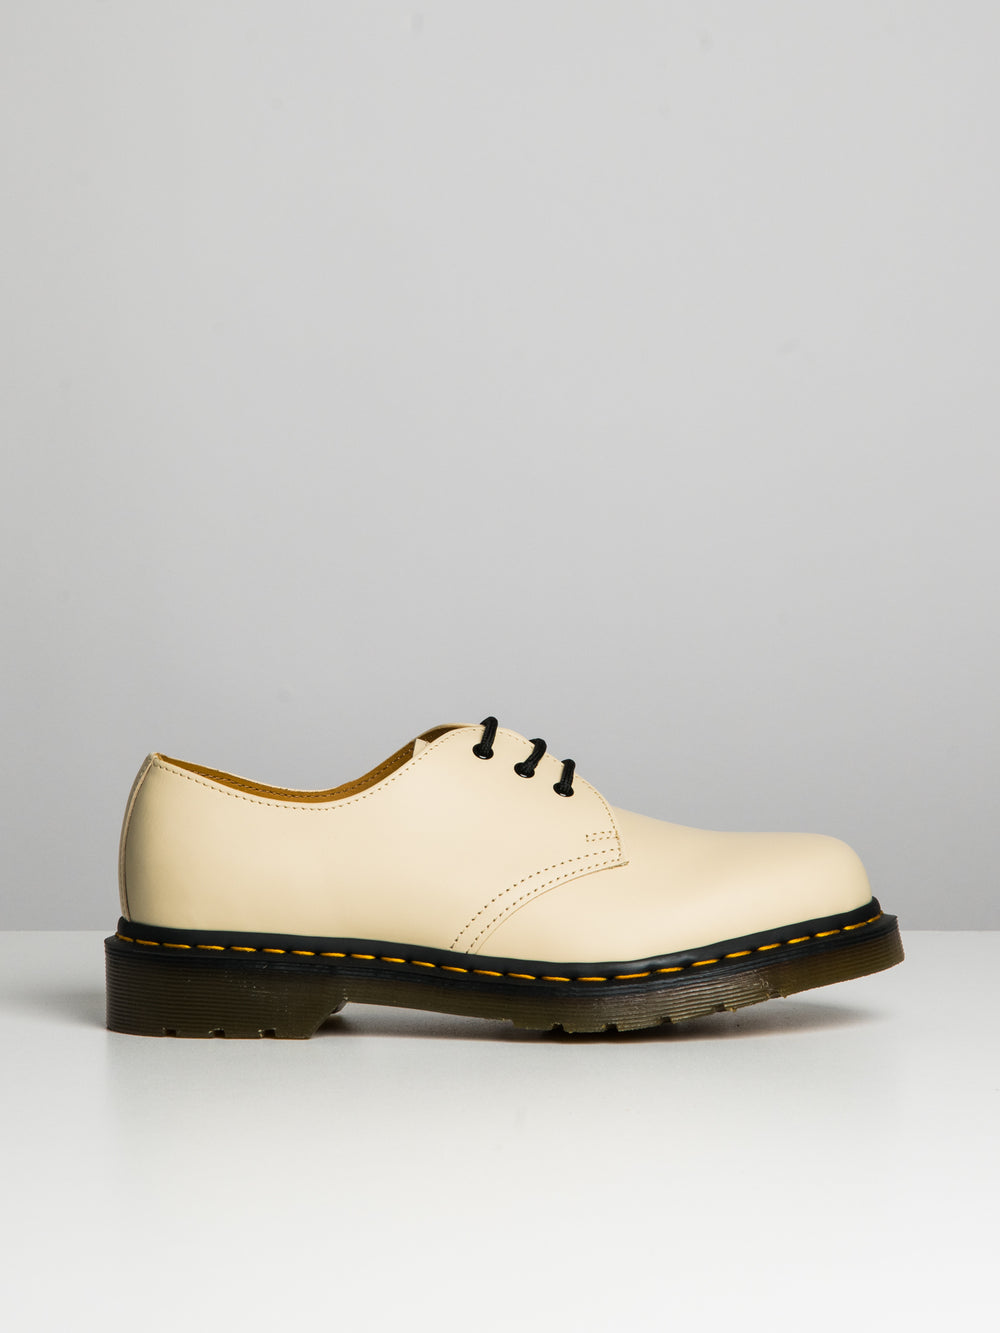 MENS DR MARTENS 1461 SMOOTH - CLEARANCE